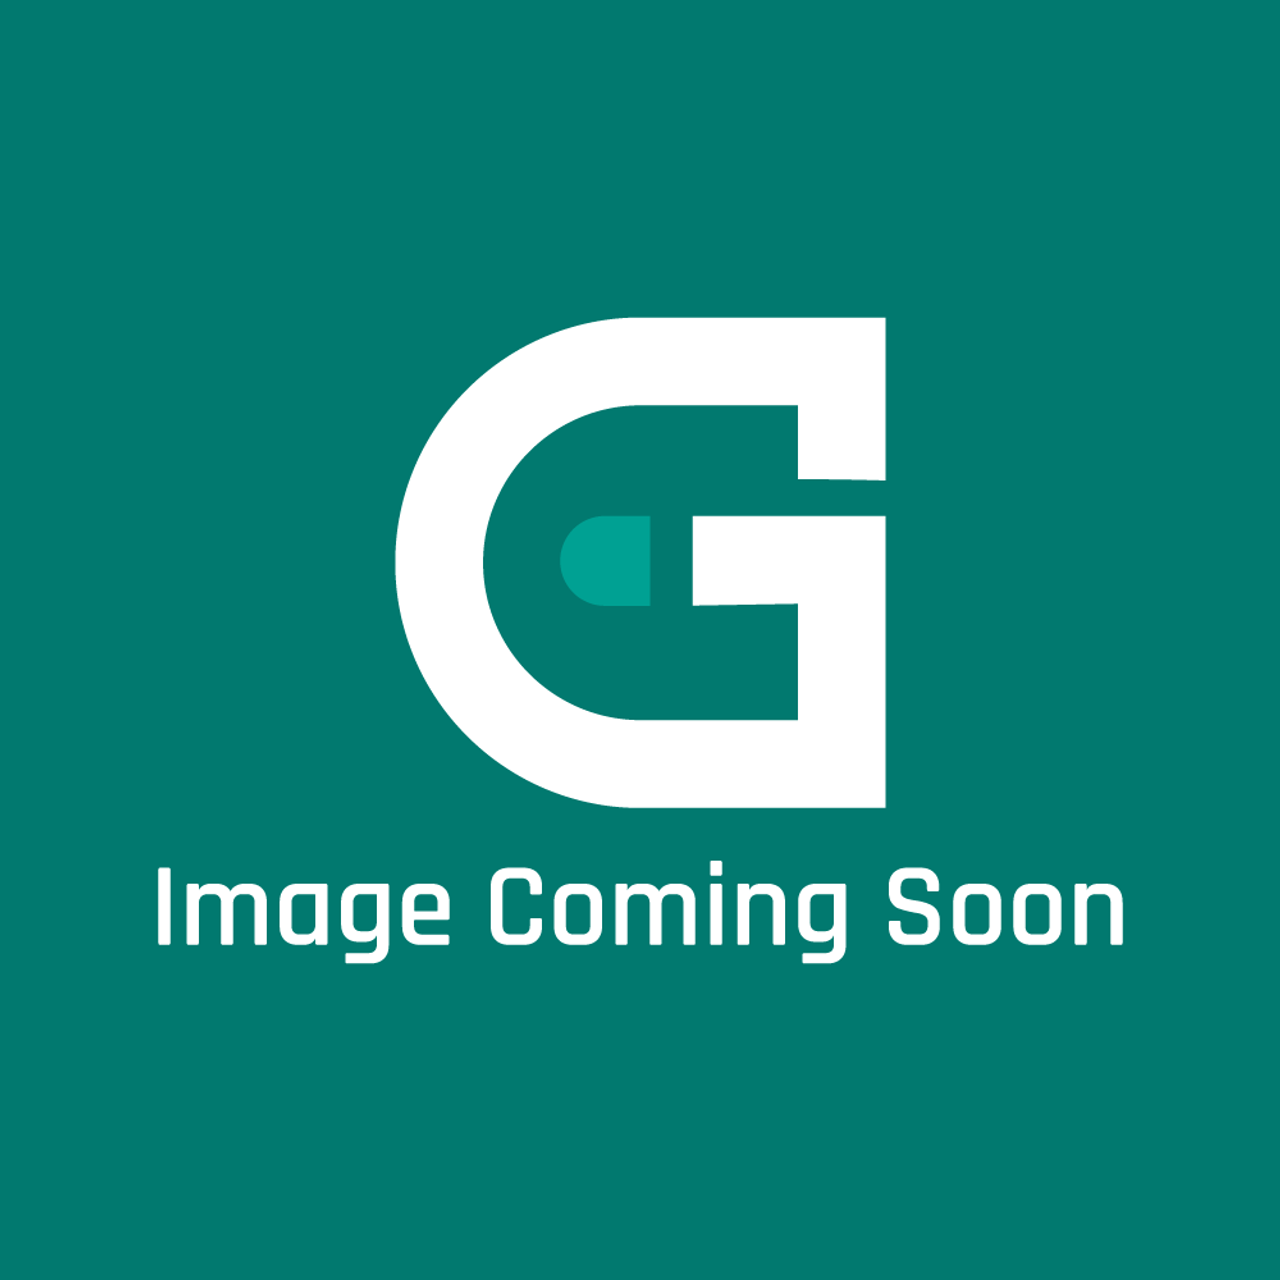 Star Mfg 2FZ15479 - Griddle Plate 48 T-Stat - Image Coming Soon!